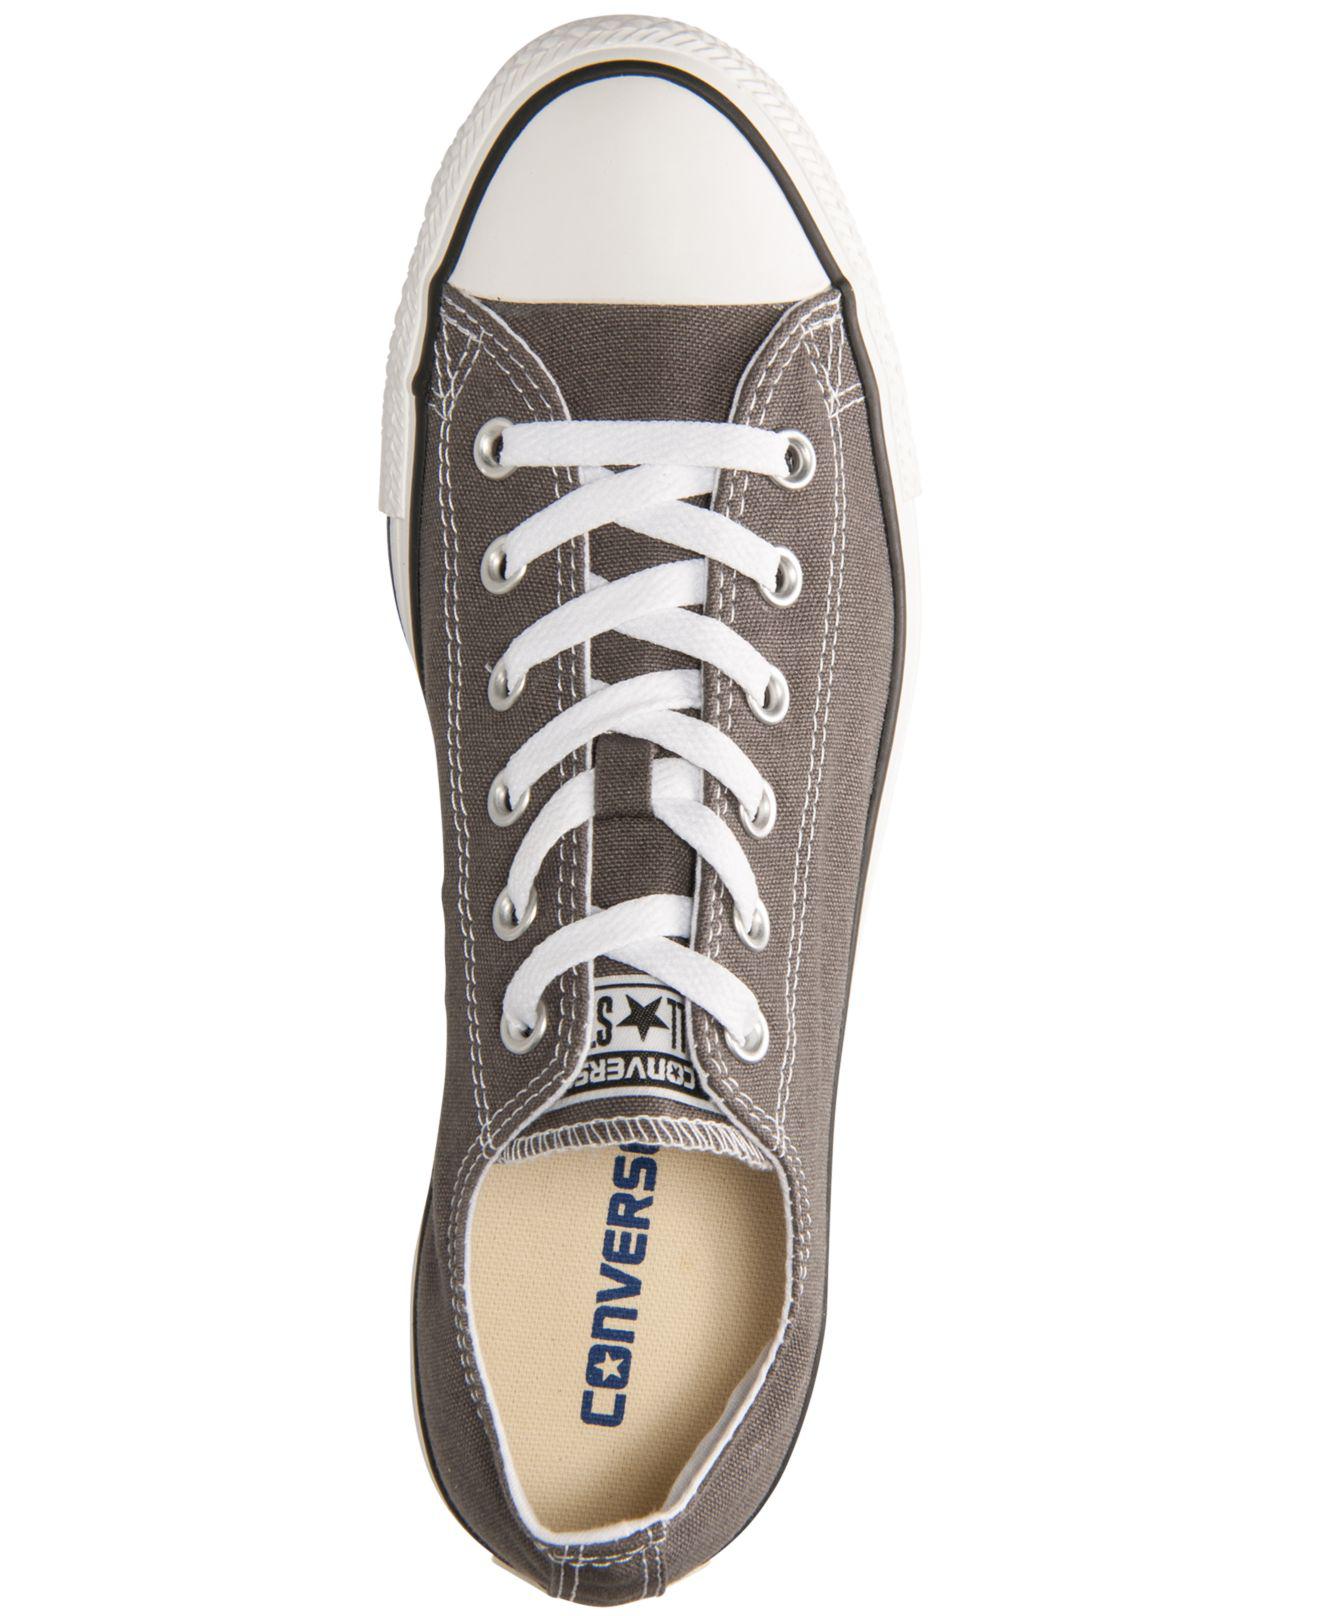 Converse Canvas Women's Chuck Taylor All Star Oxford Sneakers From ...